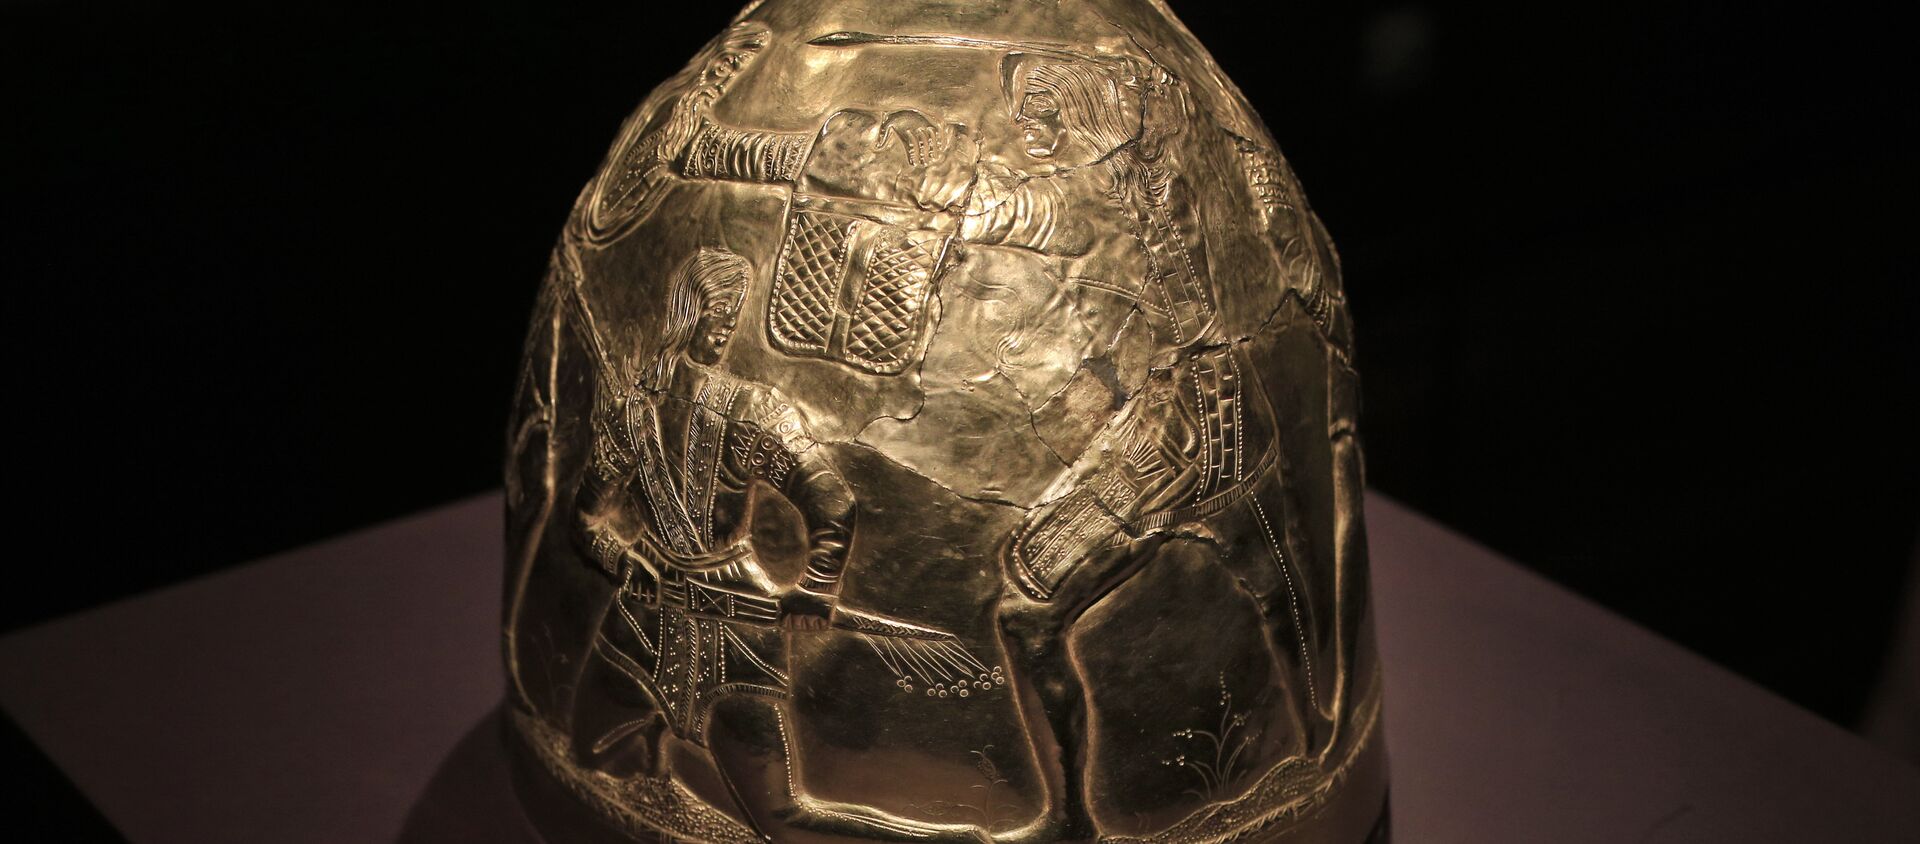 A Scythian gold helmet from the fourth century B.C. is displayed as part of the exhibit called The Crimea - Gold and Secrets of the Black Sea, at Allard Pierson historical museum in Amsterdam Friday April 4, 2014 - Sputnik International, 1920, 16.09.2020